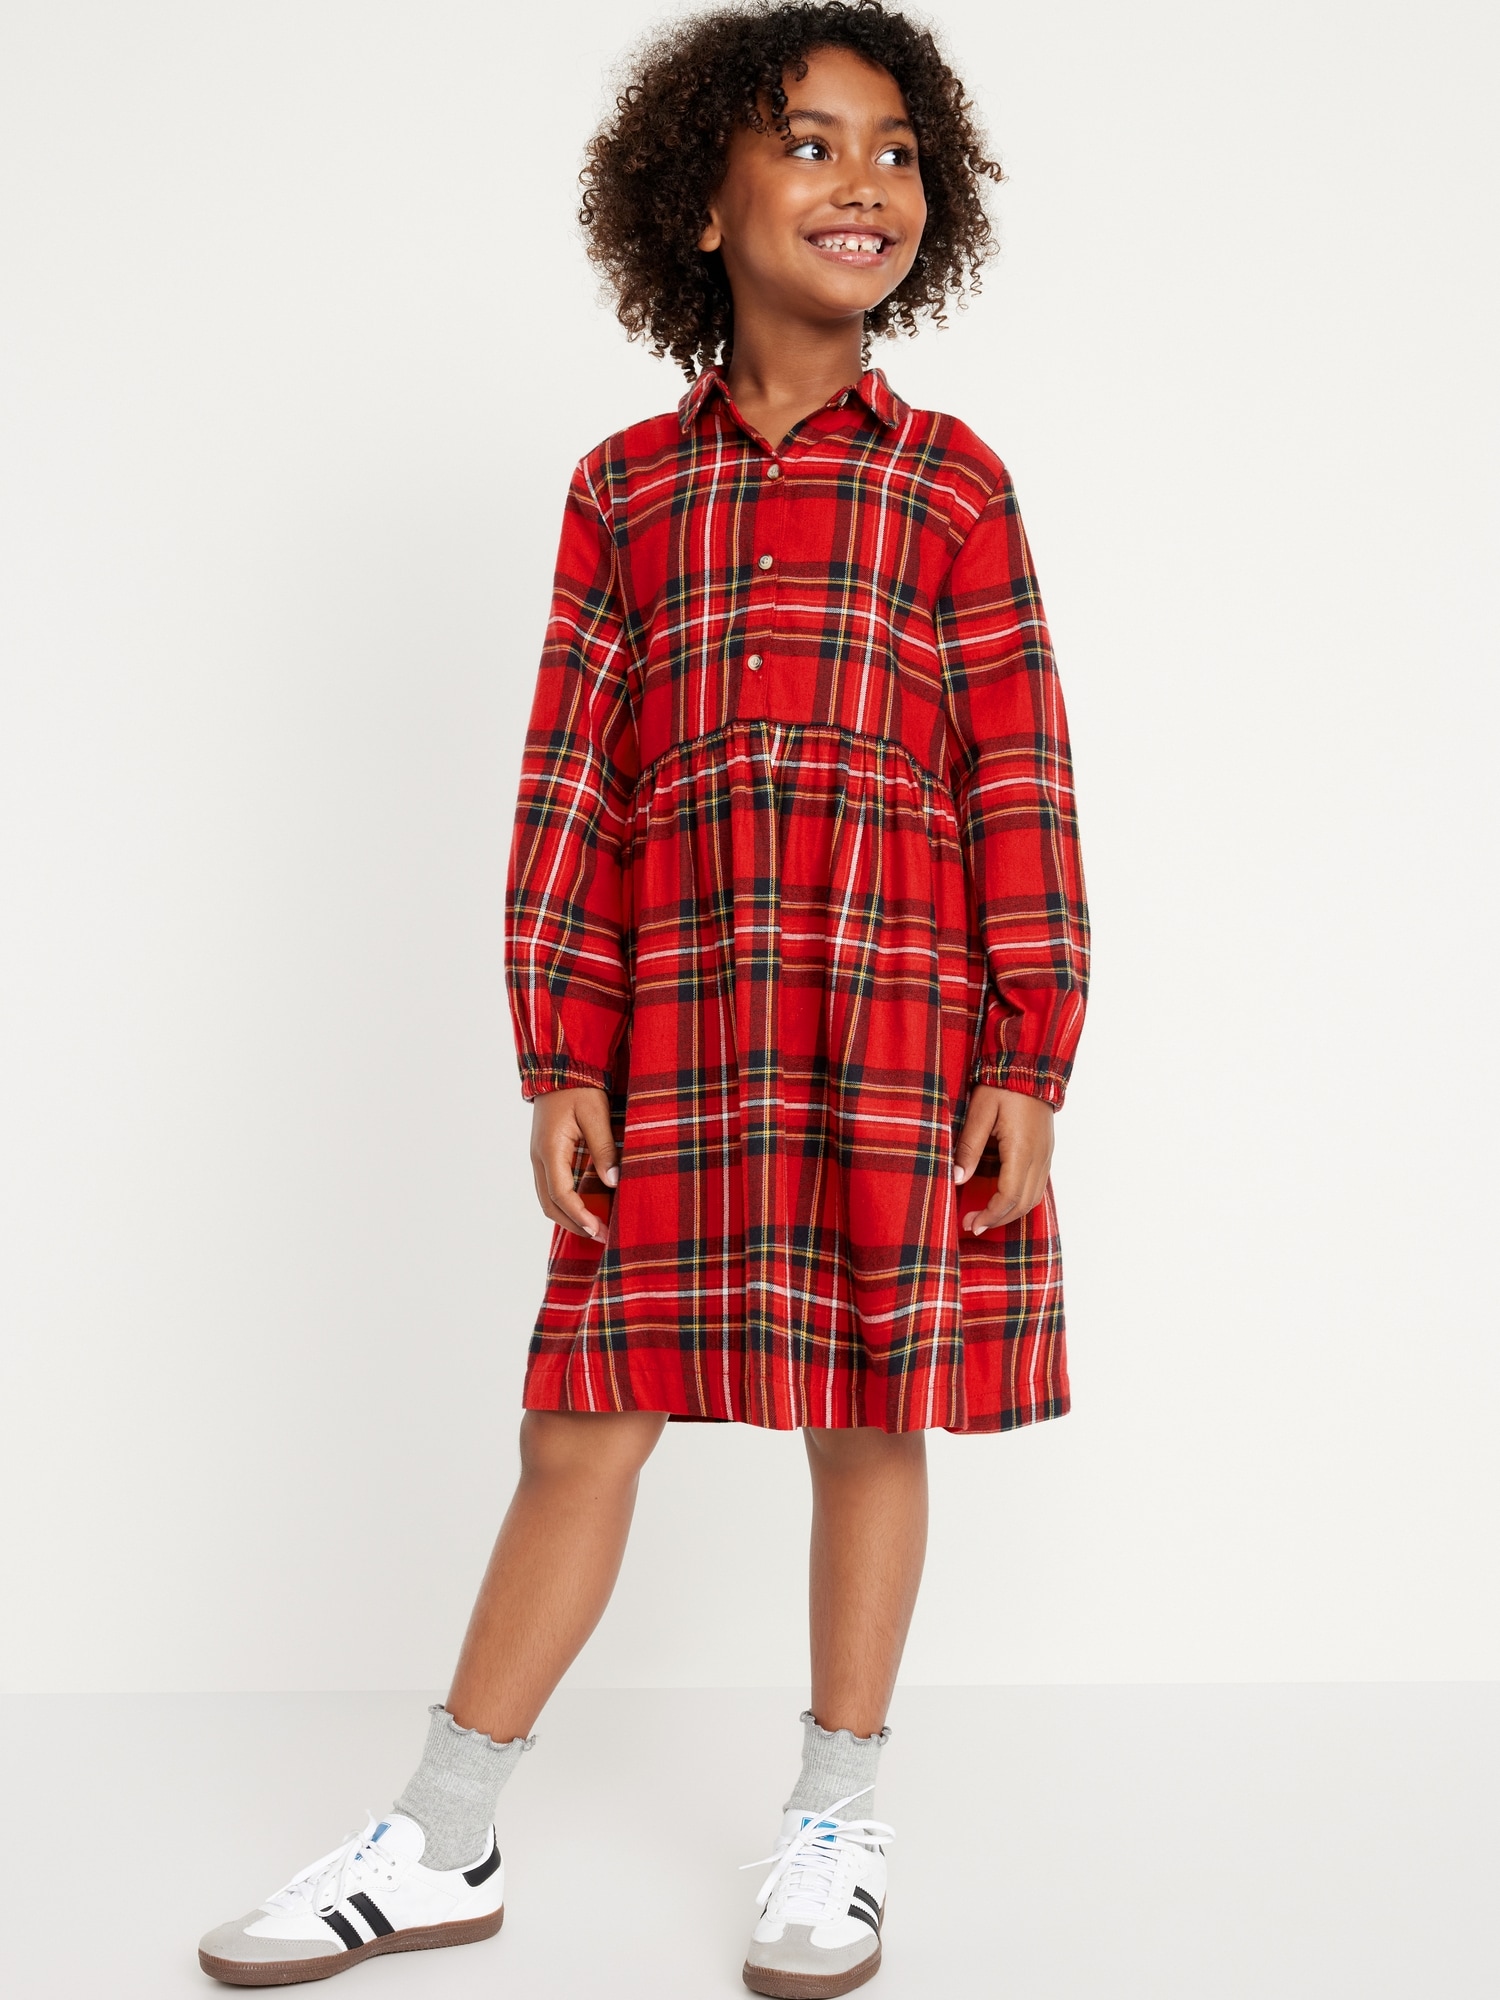 Matching Long-Sleeve Button-Front Plaid Dress for Girls | Old Navy